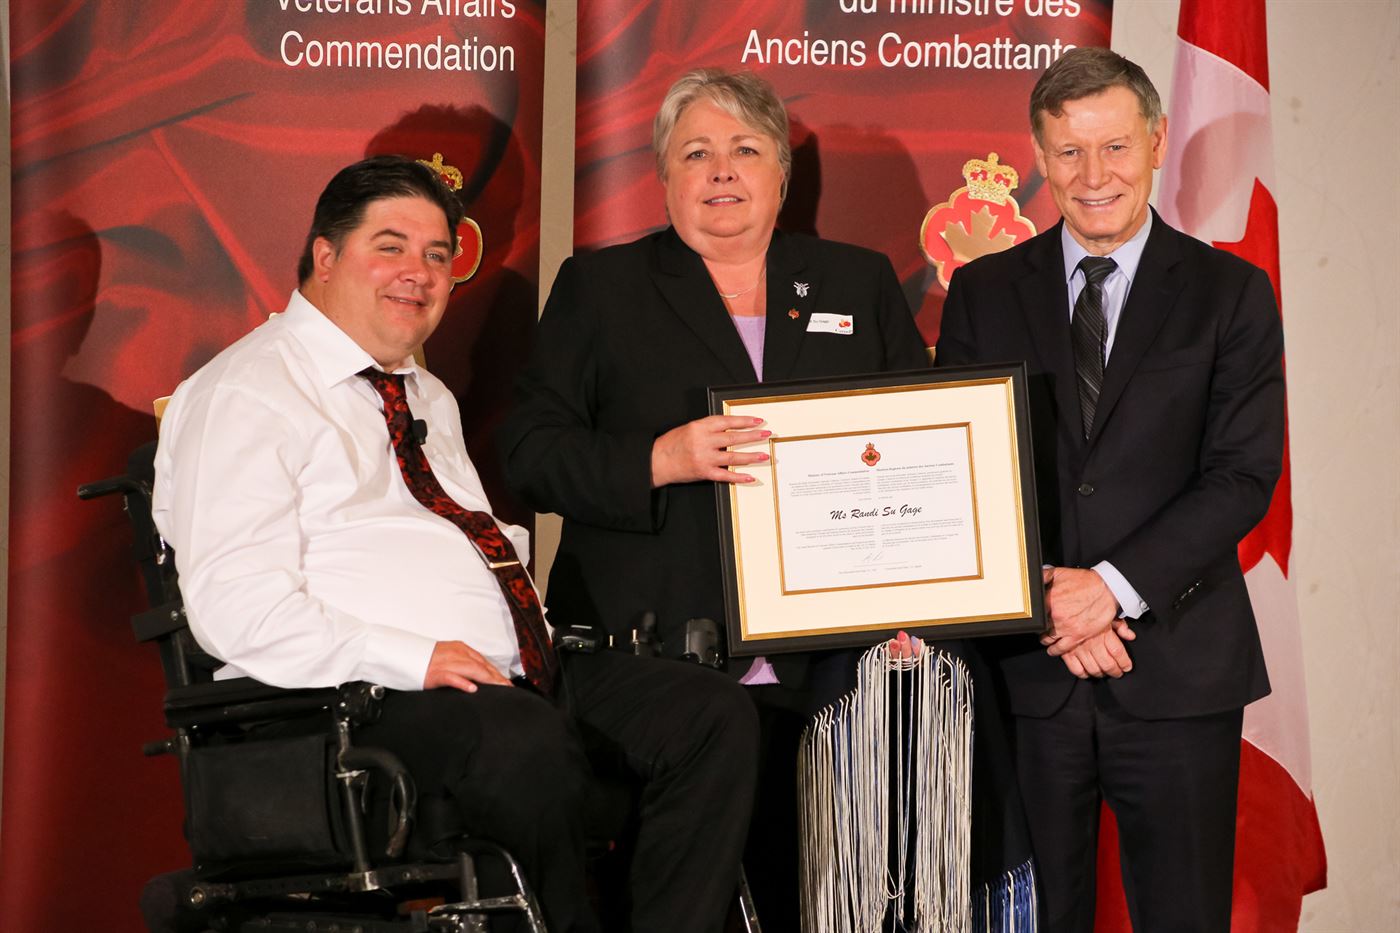 The honorable Kent Hehr, Minister for Veterans Affairs, Ms. Randi Gage and MP Terry Duguid.